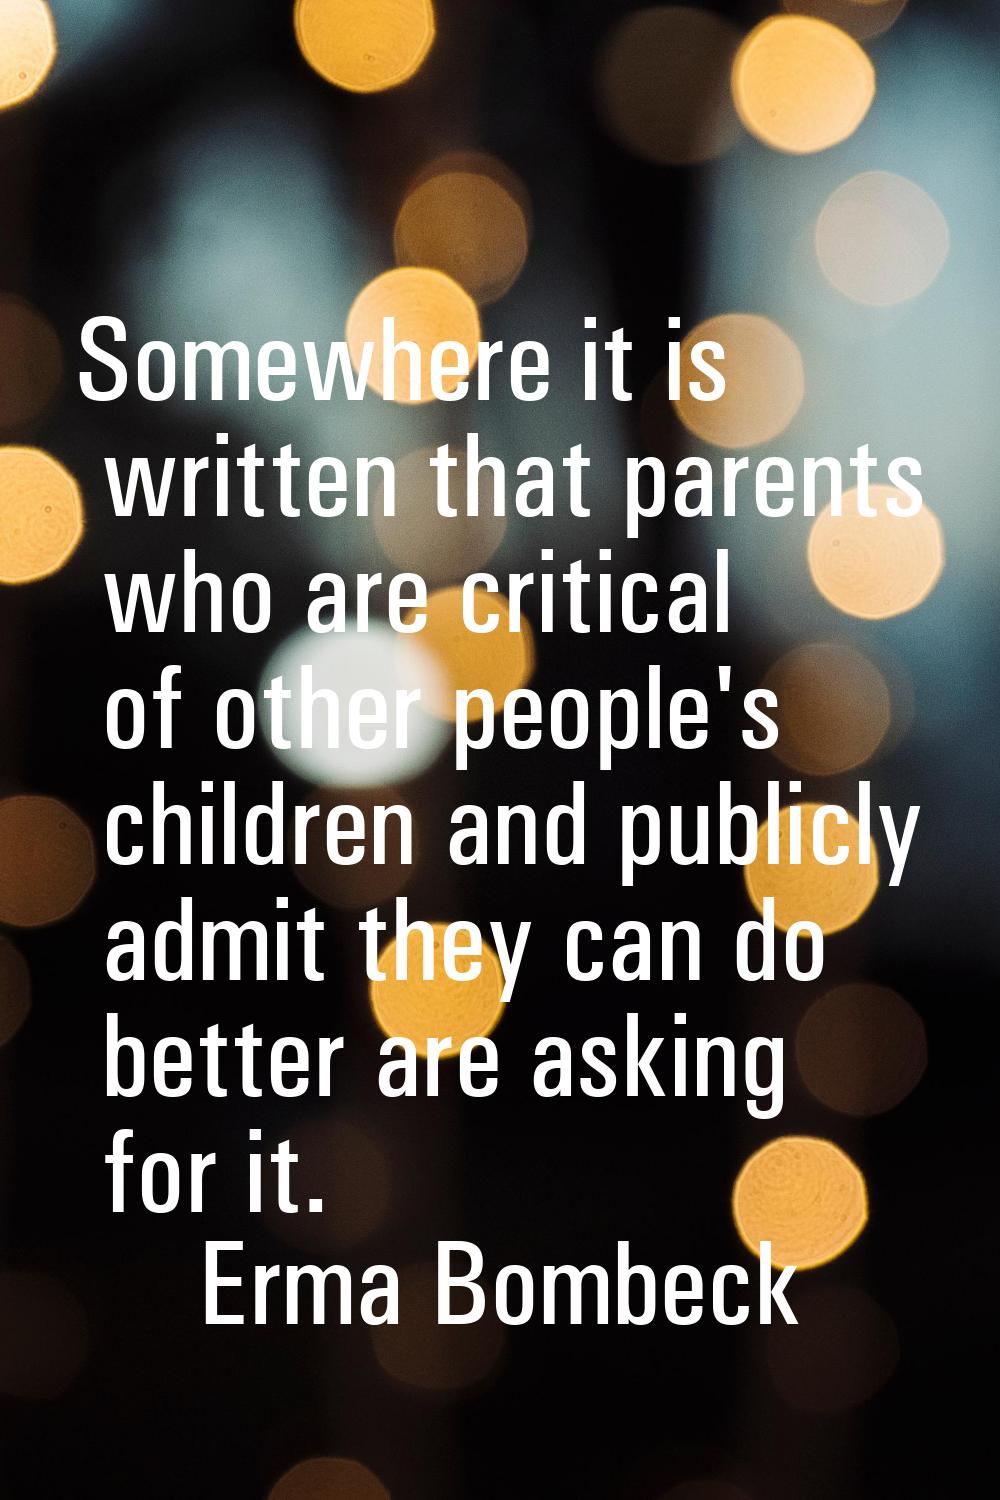 Somewhere it is written that parents who are critical of other people's children and publicly admit